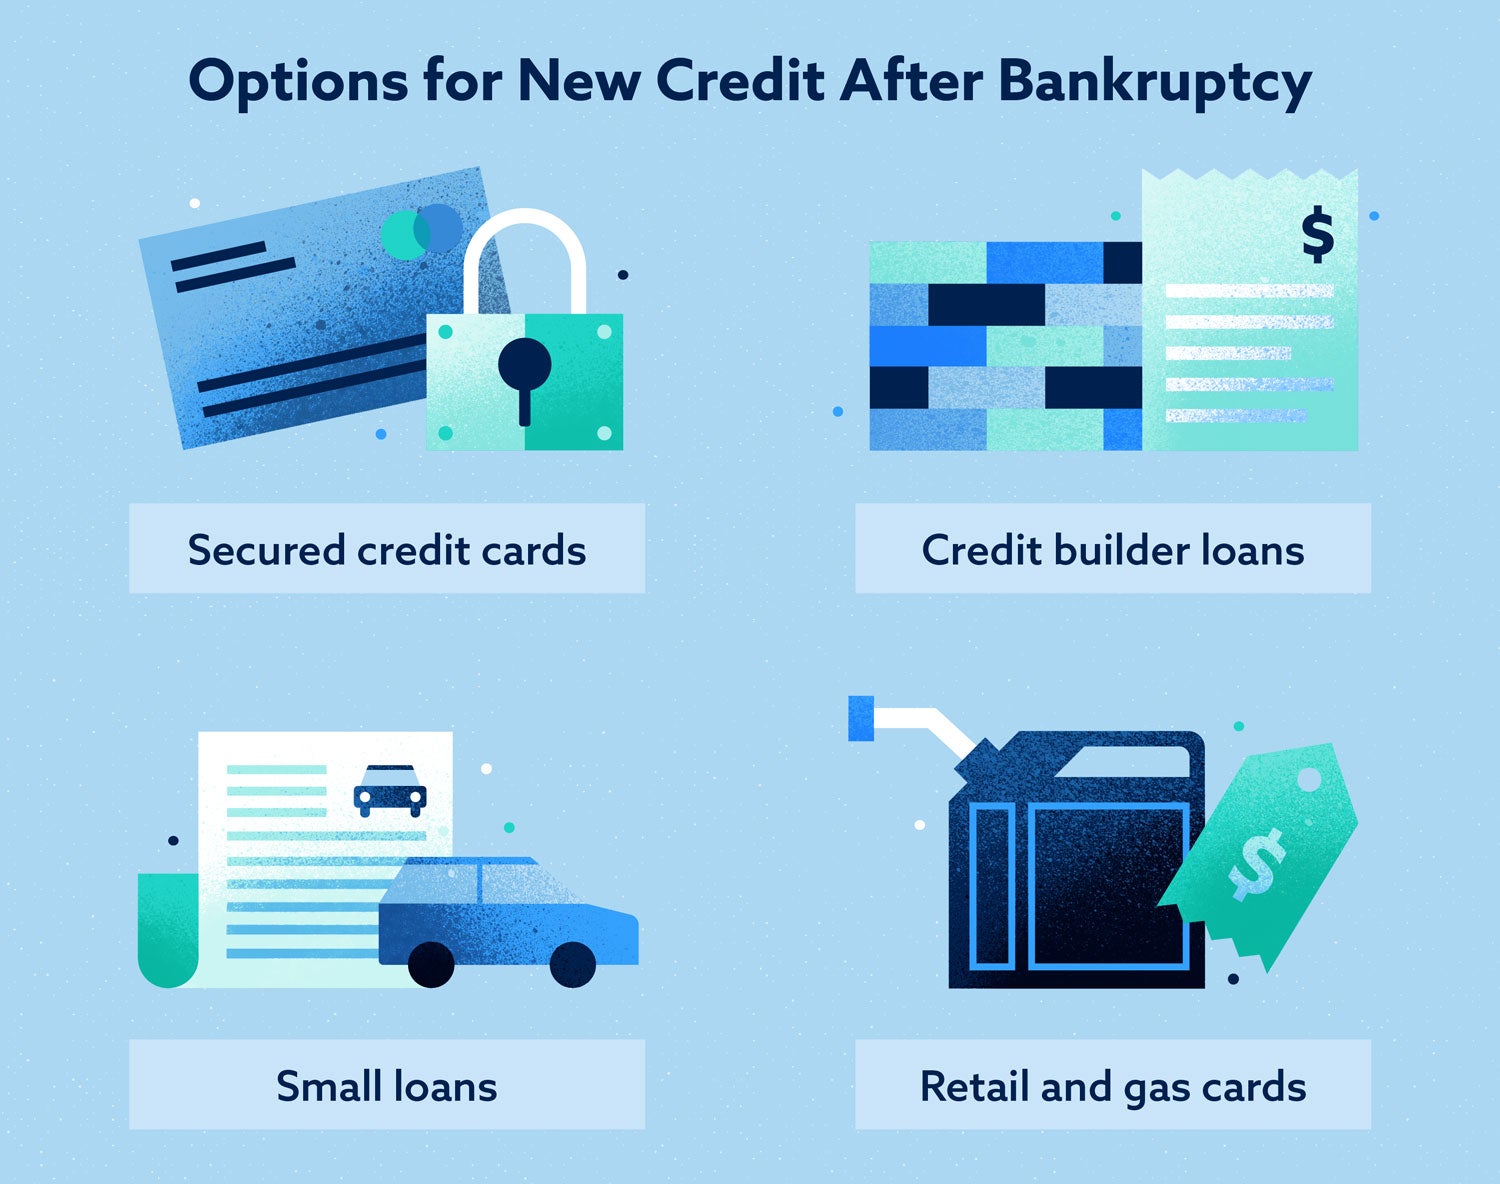 How To Repair Credit After Bankruptcy?